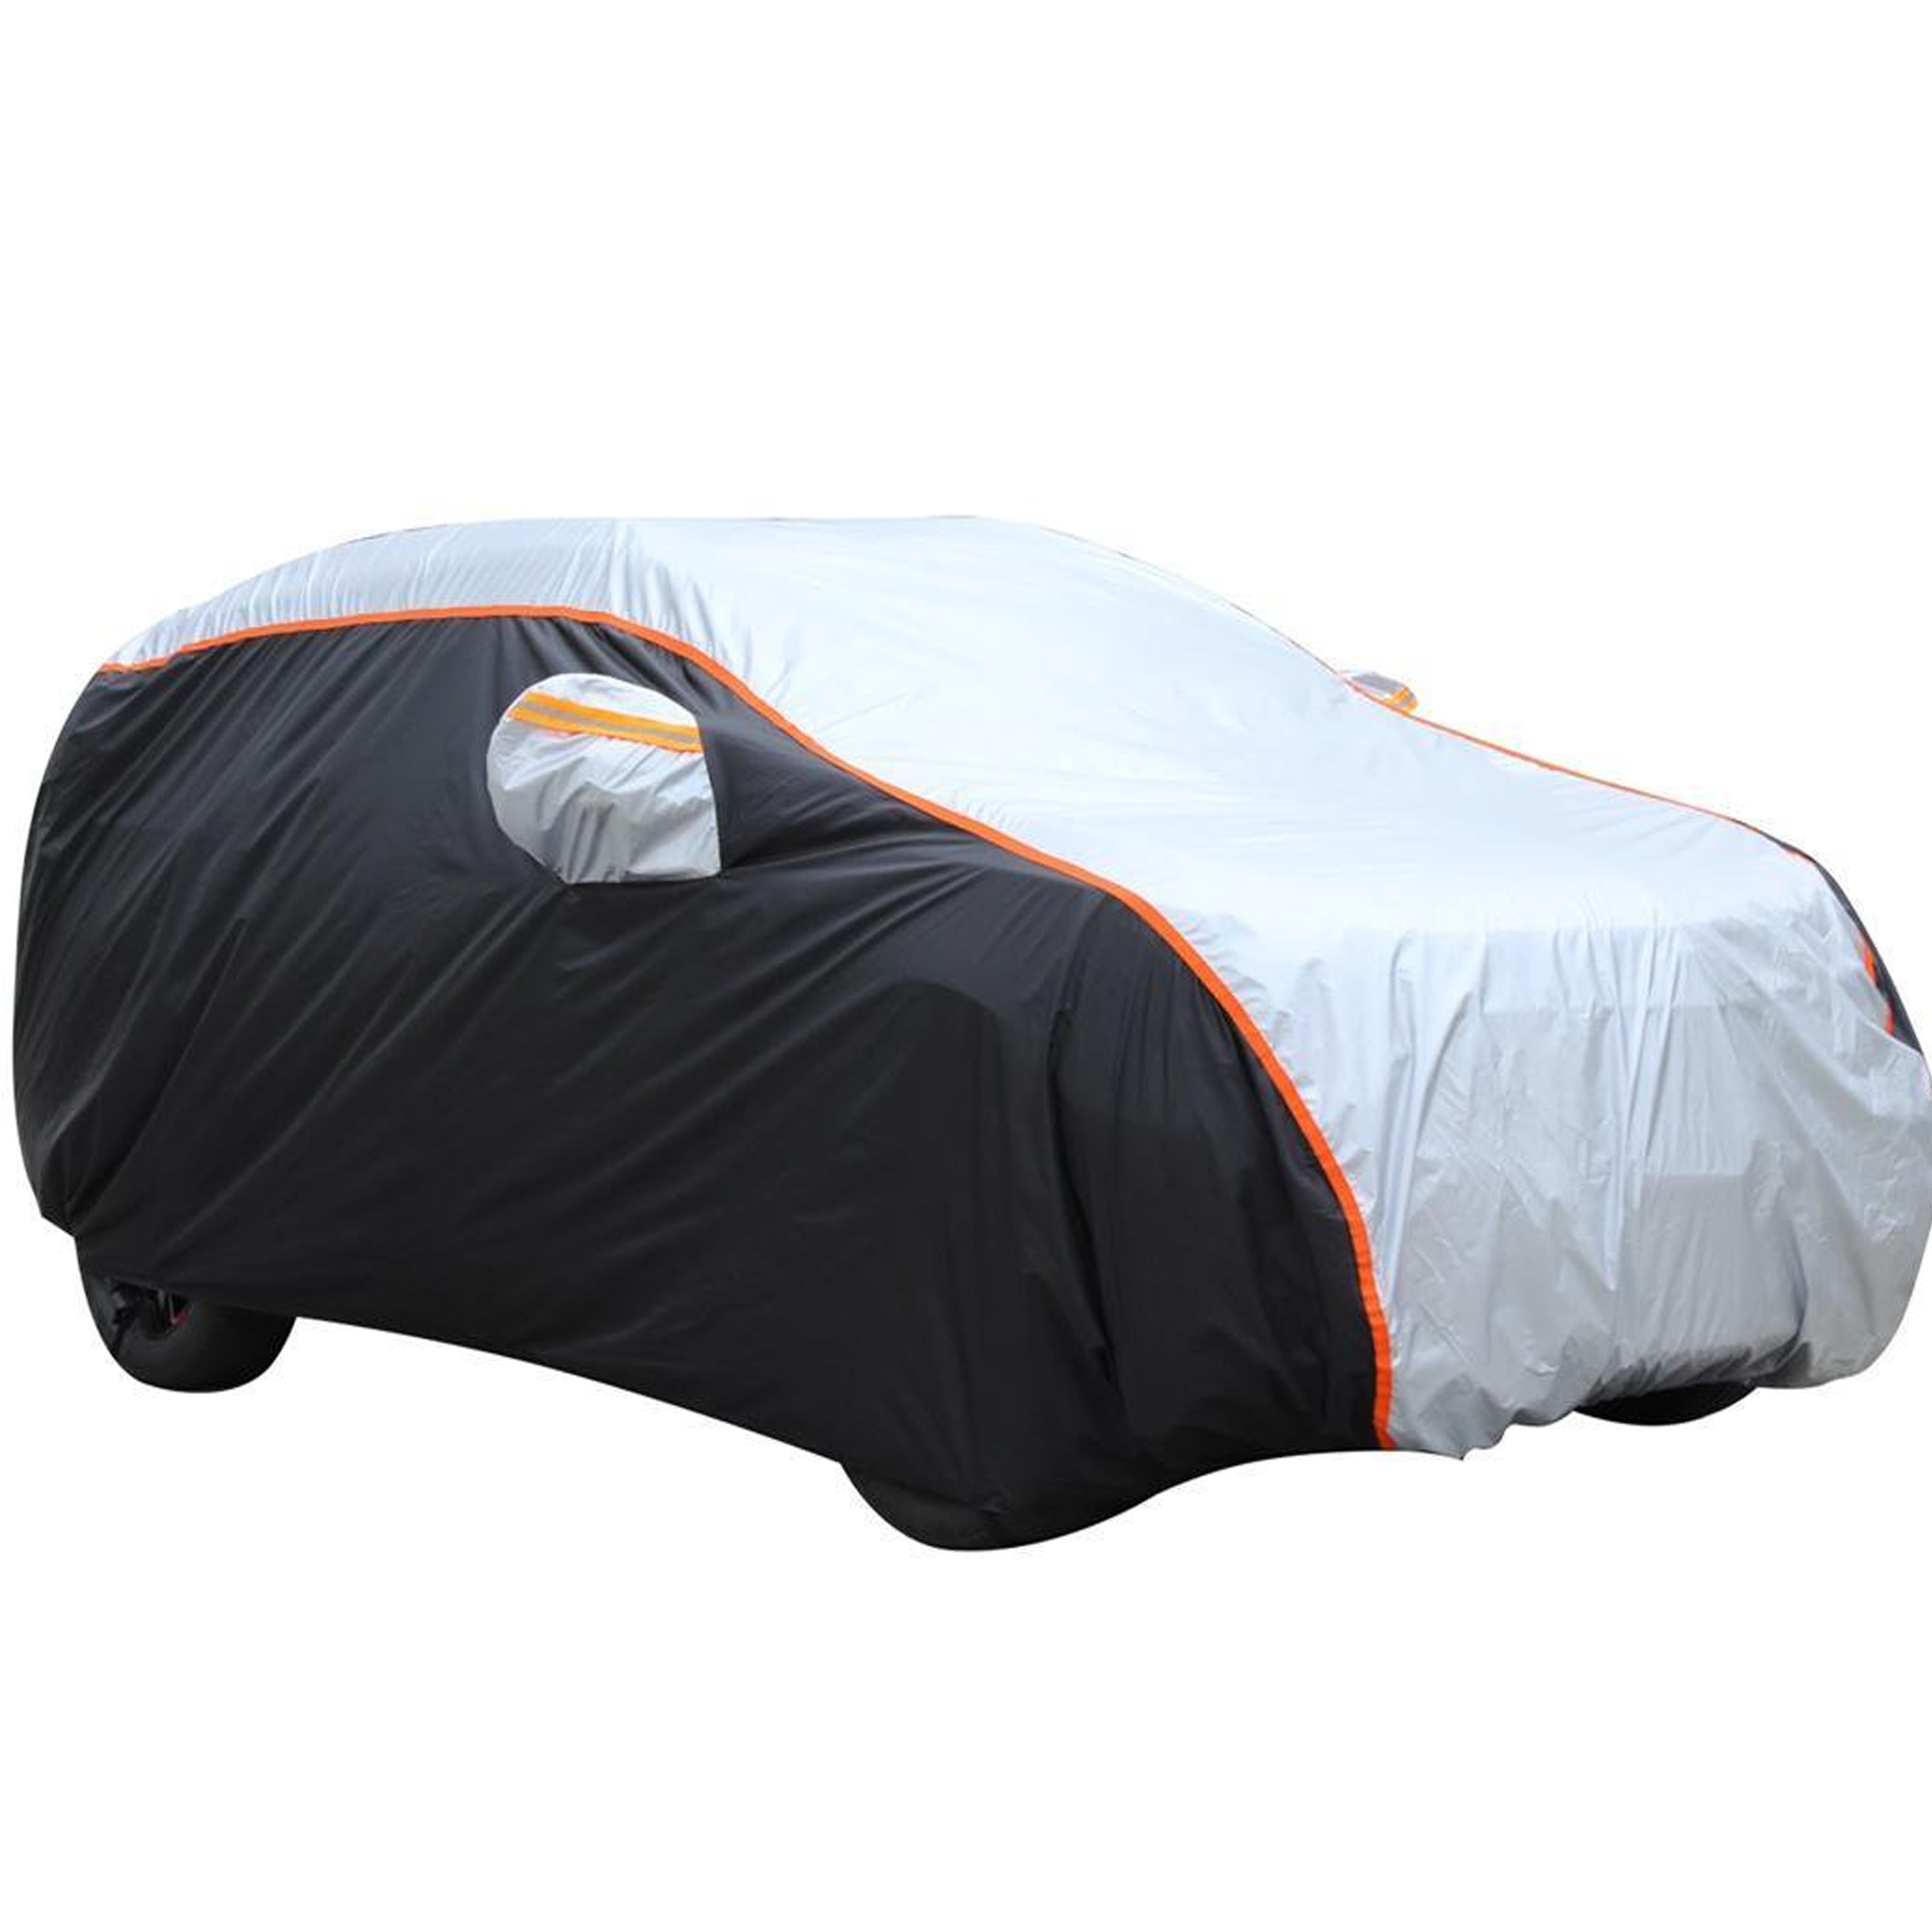 2023 Audi TT Car Covers - Custom fit indoor and outdoor vehicle covers